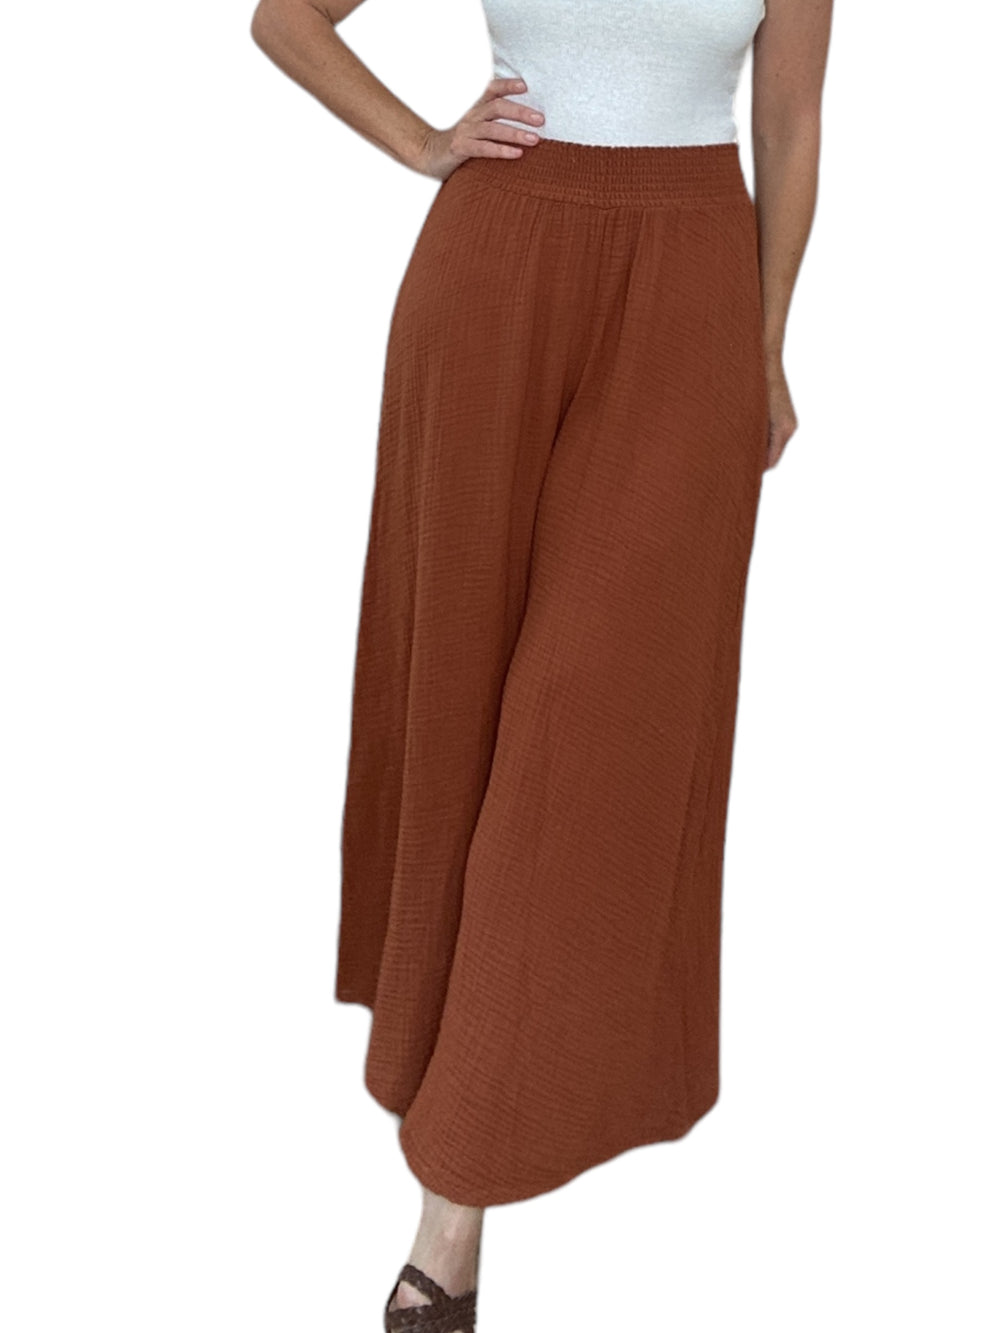 SIMBA EXTRA WIDE SMOCKED WAIST PANT-TOFFEE - Kingfisher Road - Online Boutique